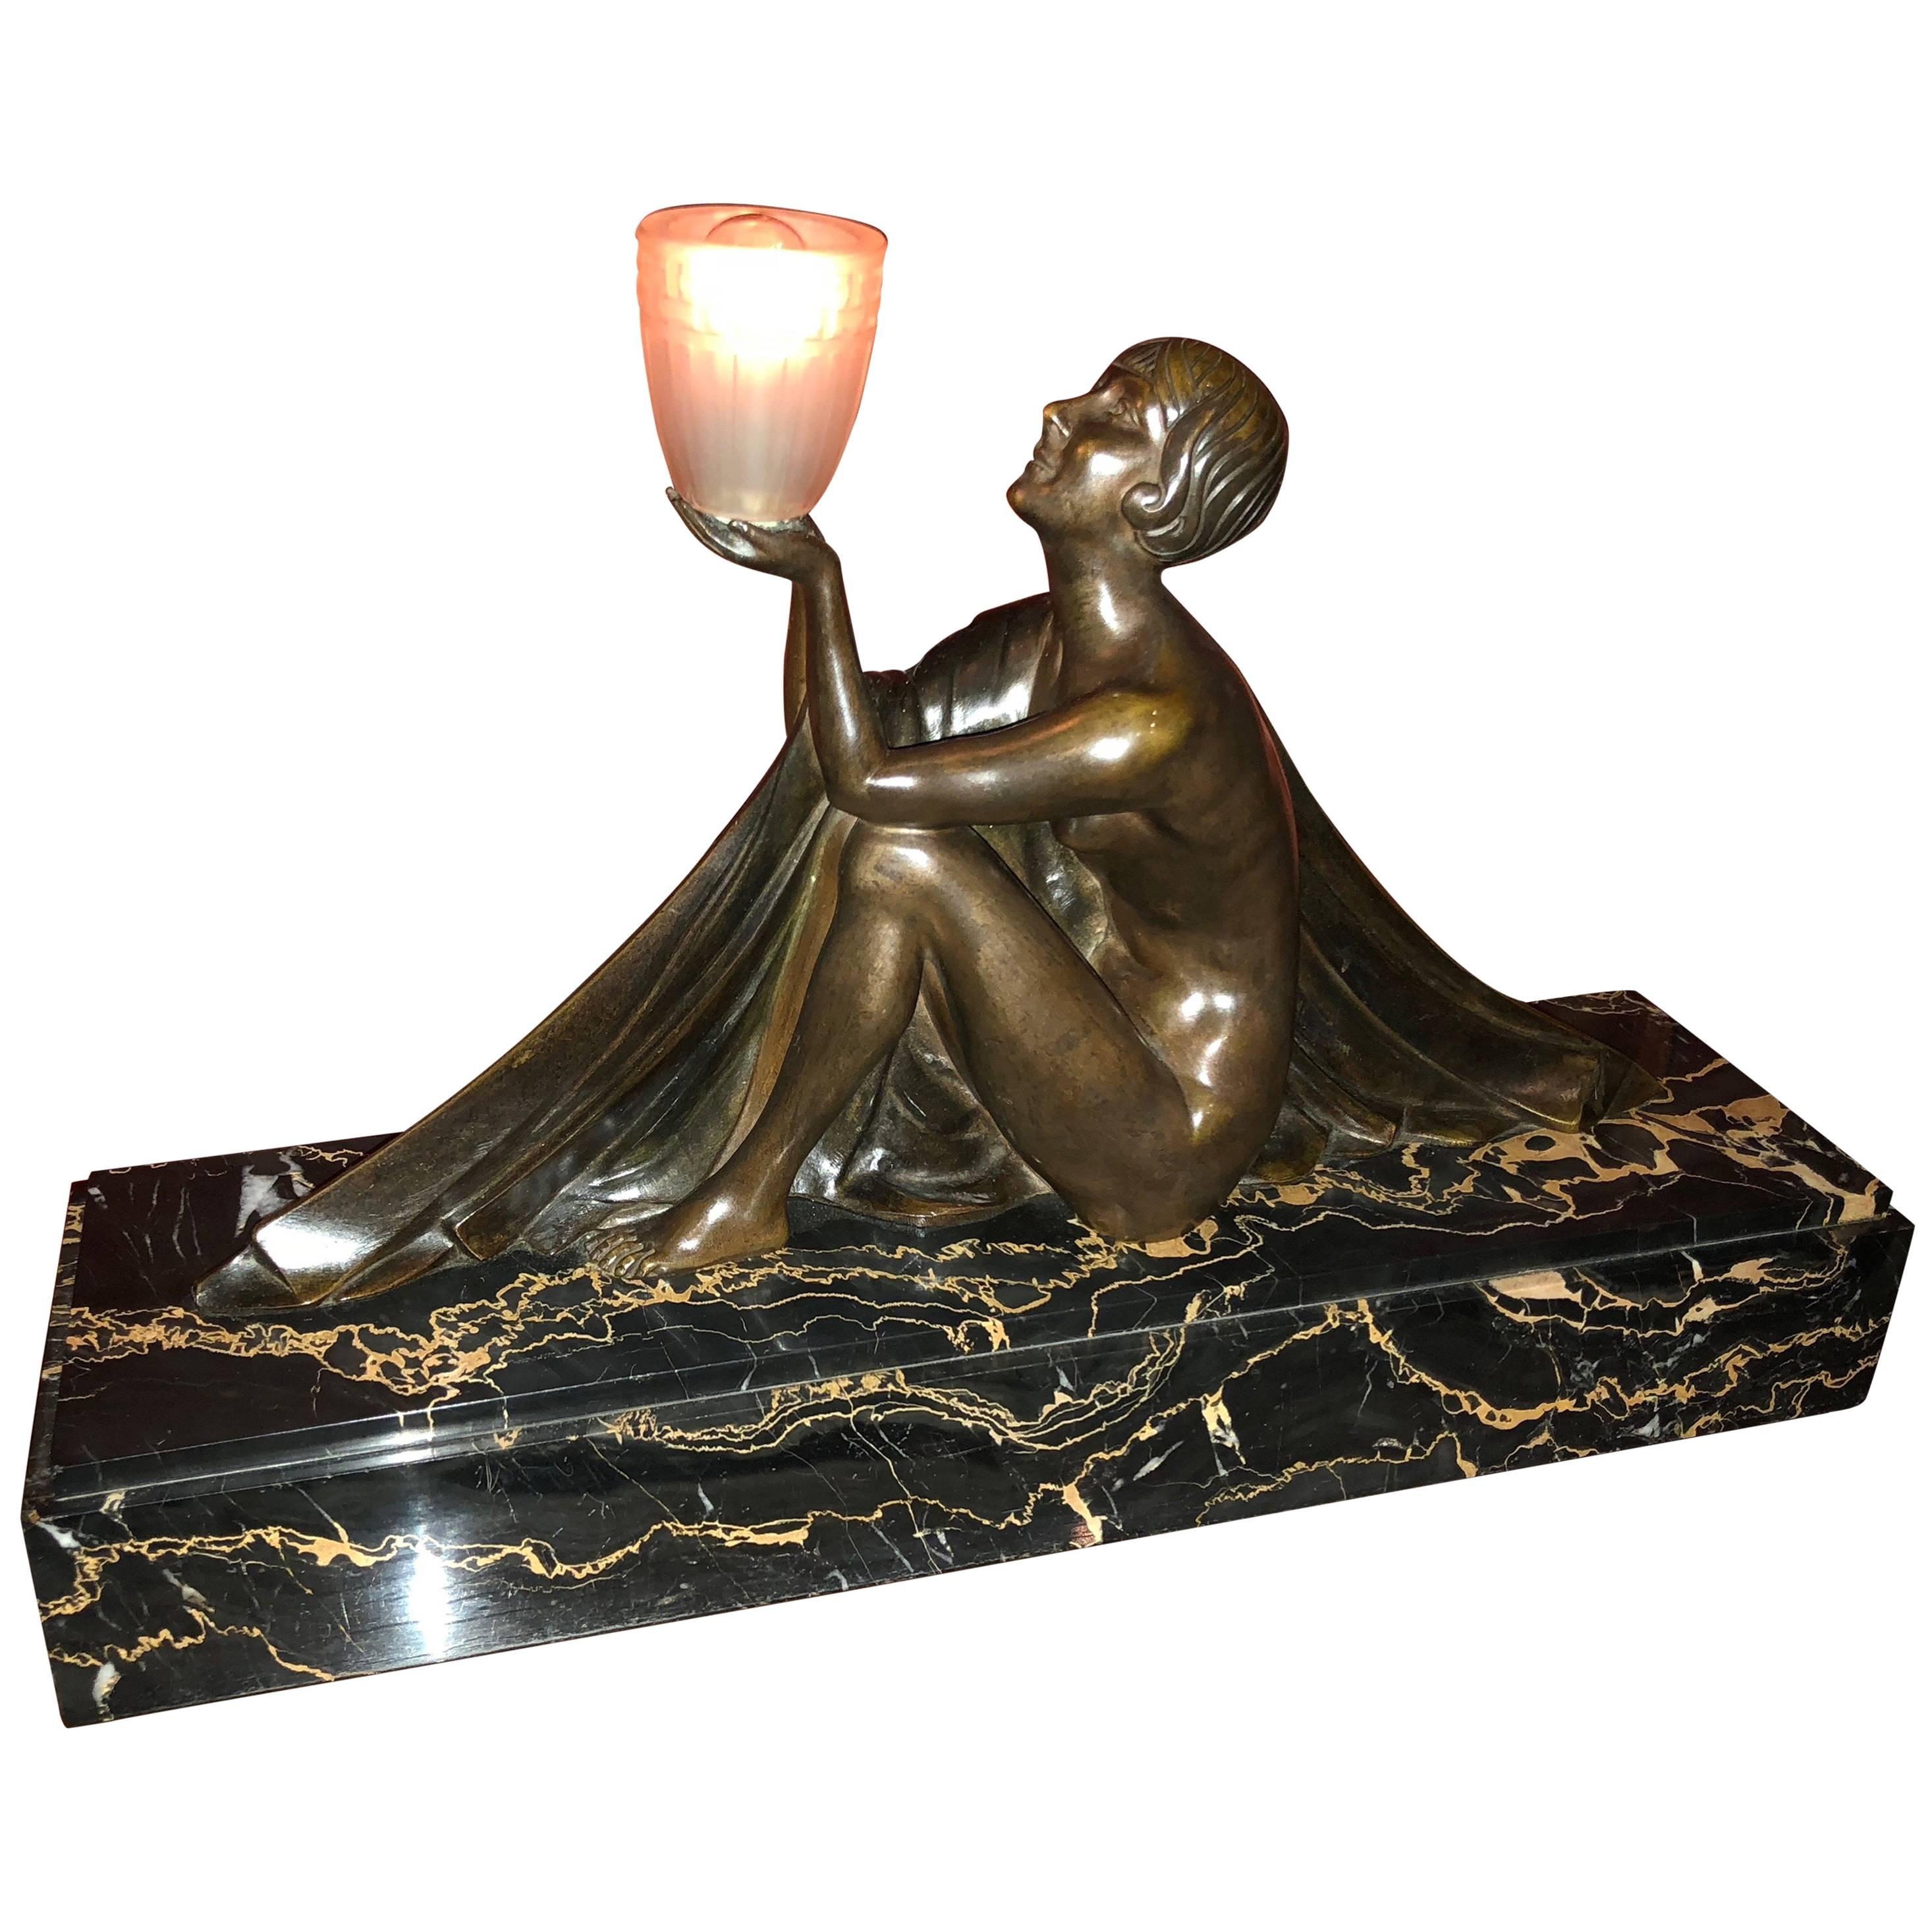 French Art Deco Bronze and Marble Lamp by J. Lormier Statue Sculpture